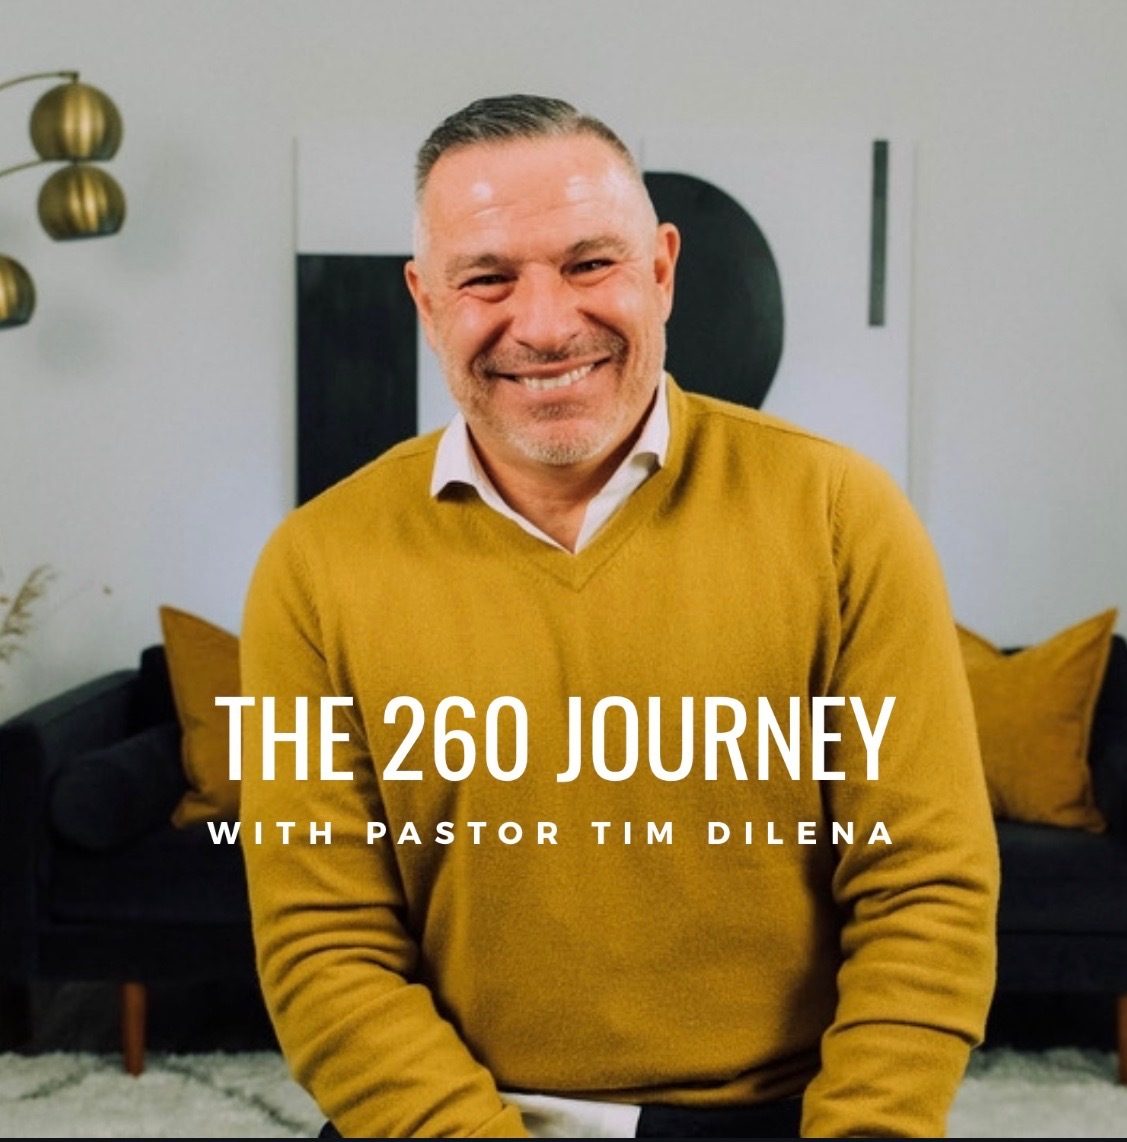 3 John | The 260 Journey with Pastor Tim Dilena | The 260 Journey Podcast